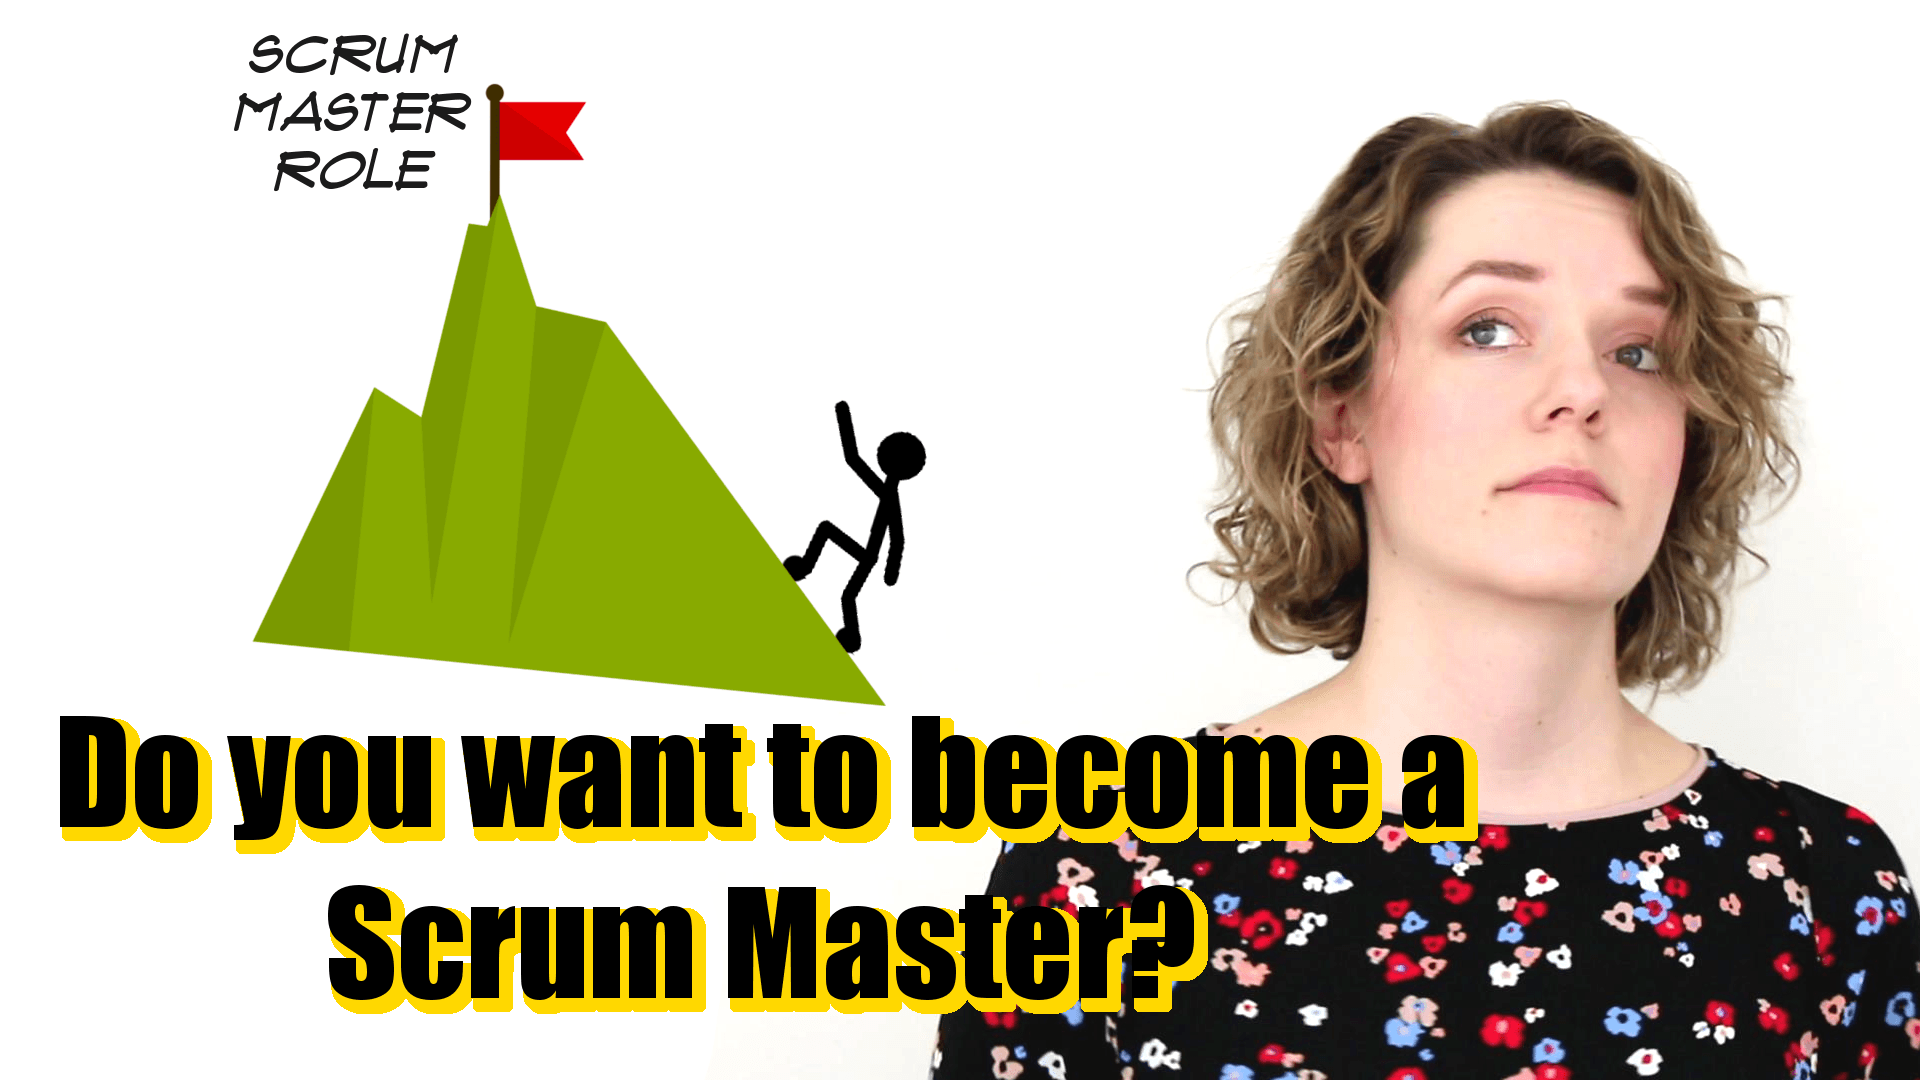 The first steps on your journey of becoming a Scrum Master